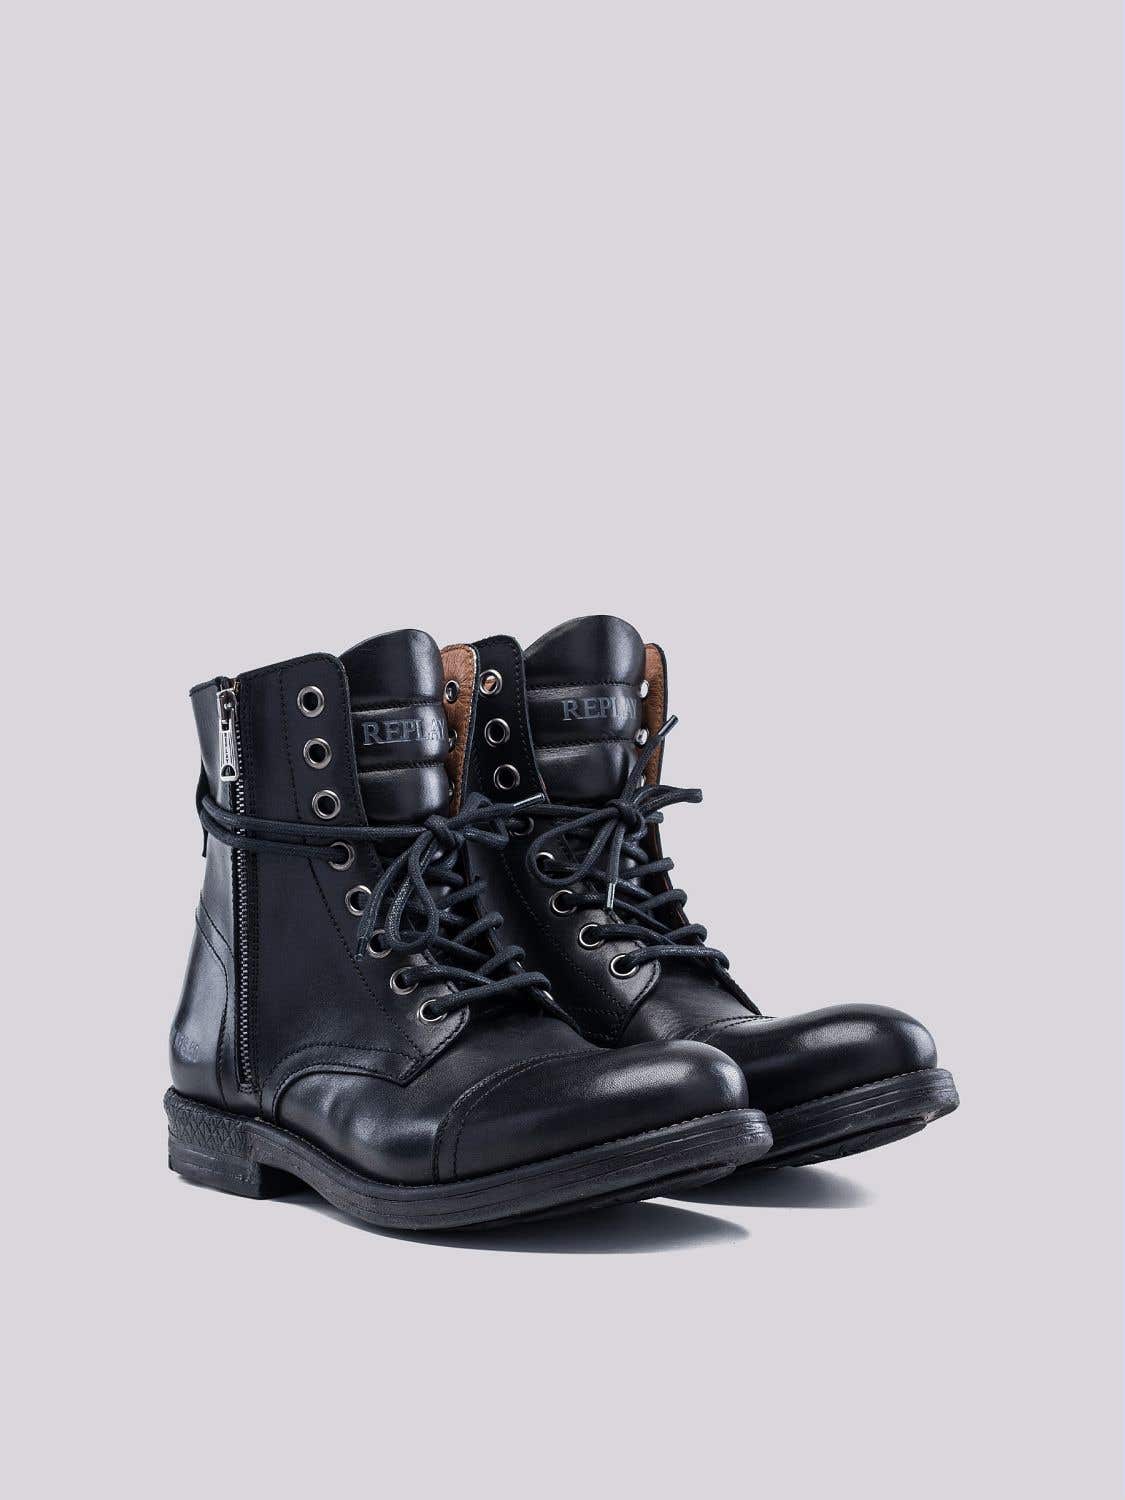 REPLAY Zipper and Laces Black Boot